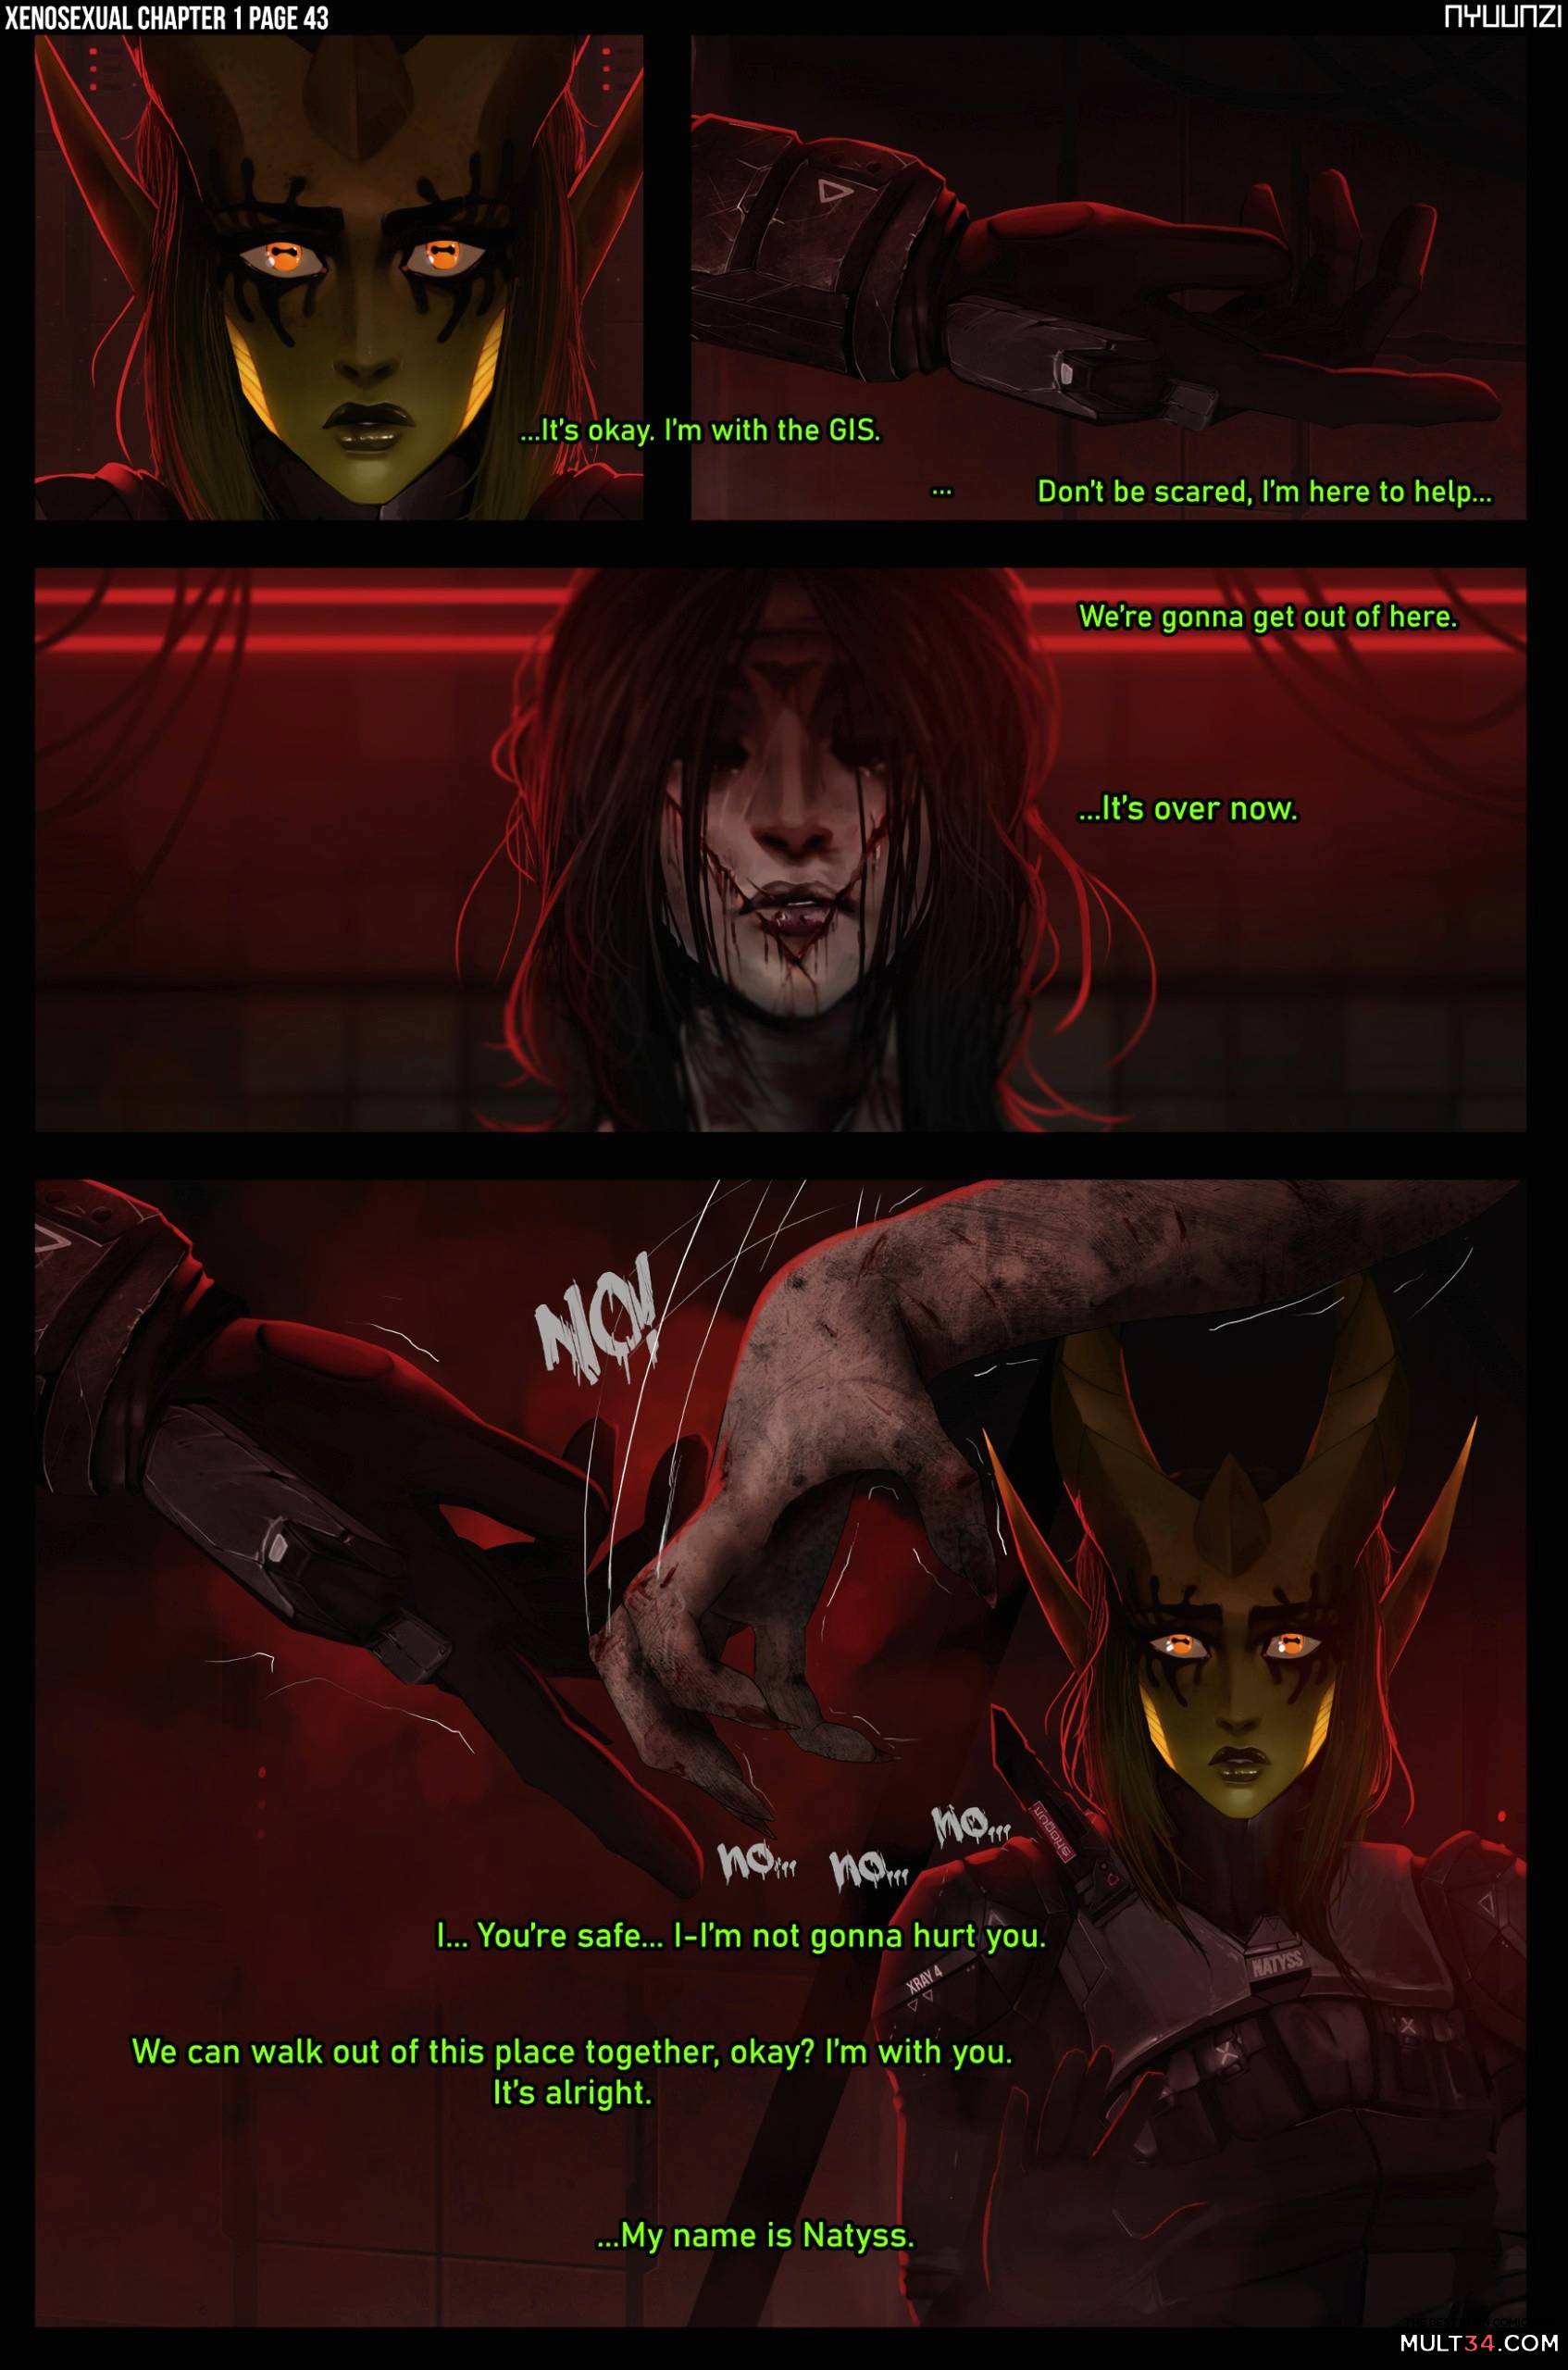 Xenosexual (Reboot) page 45